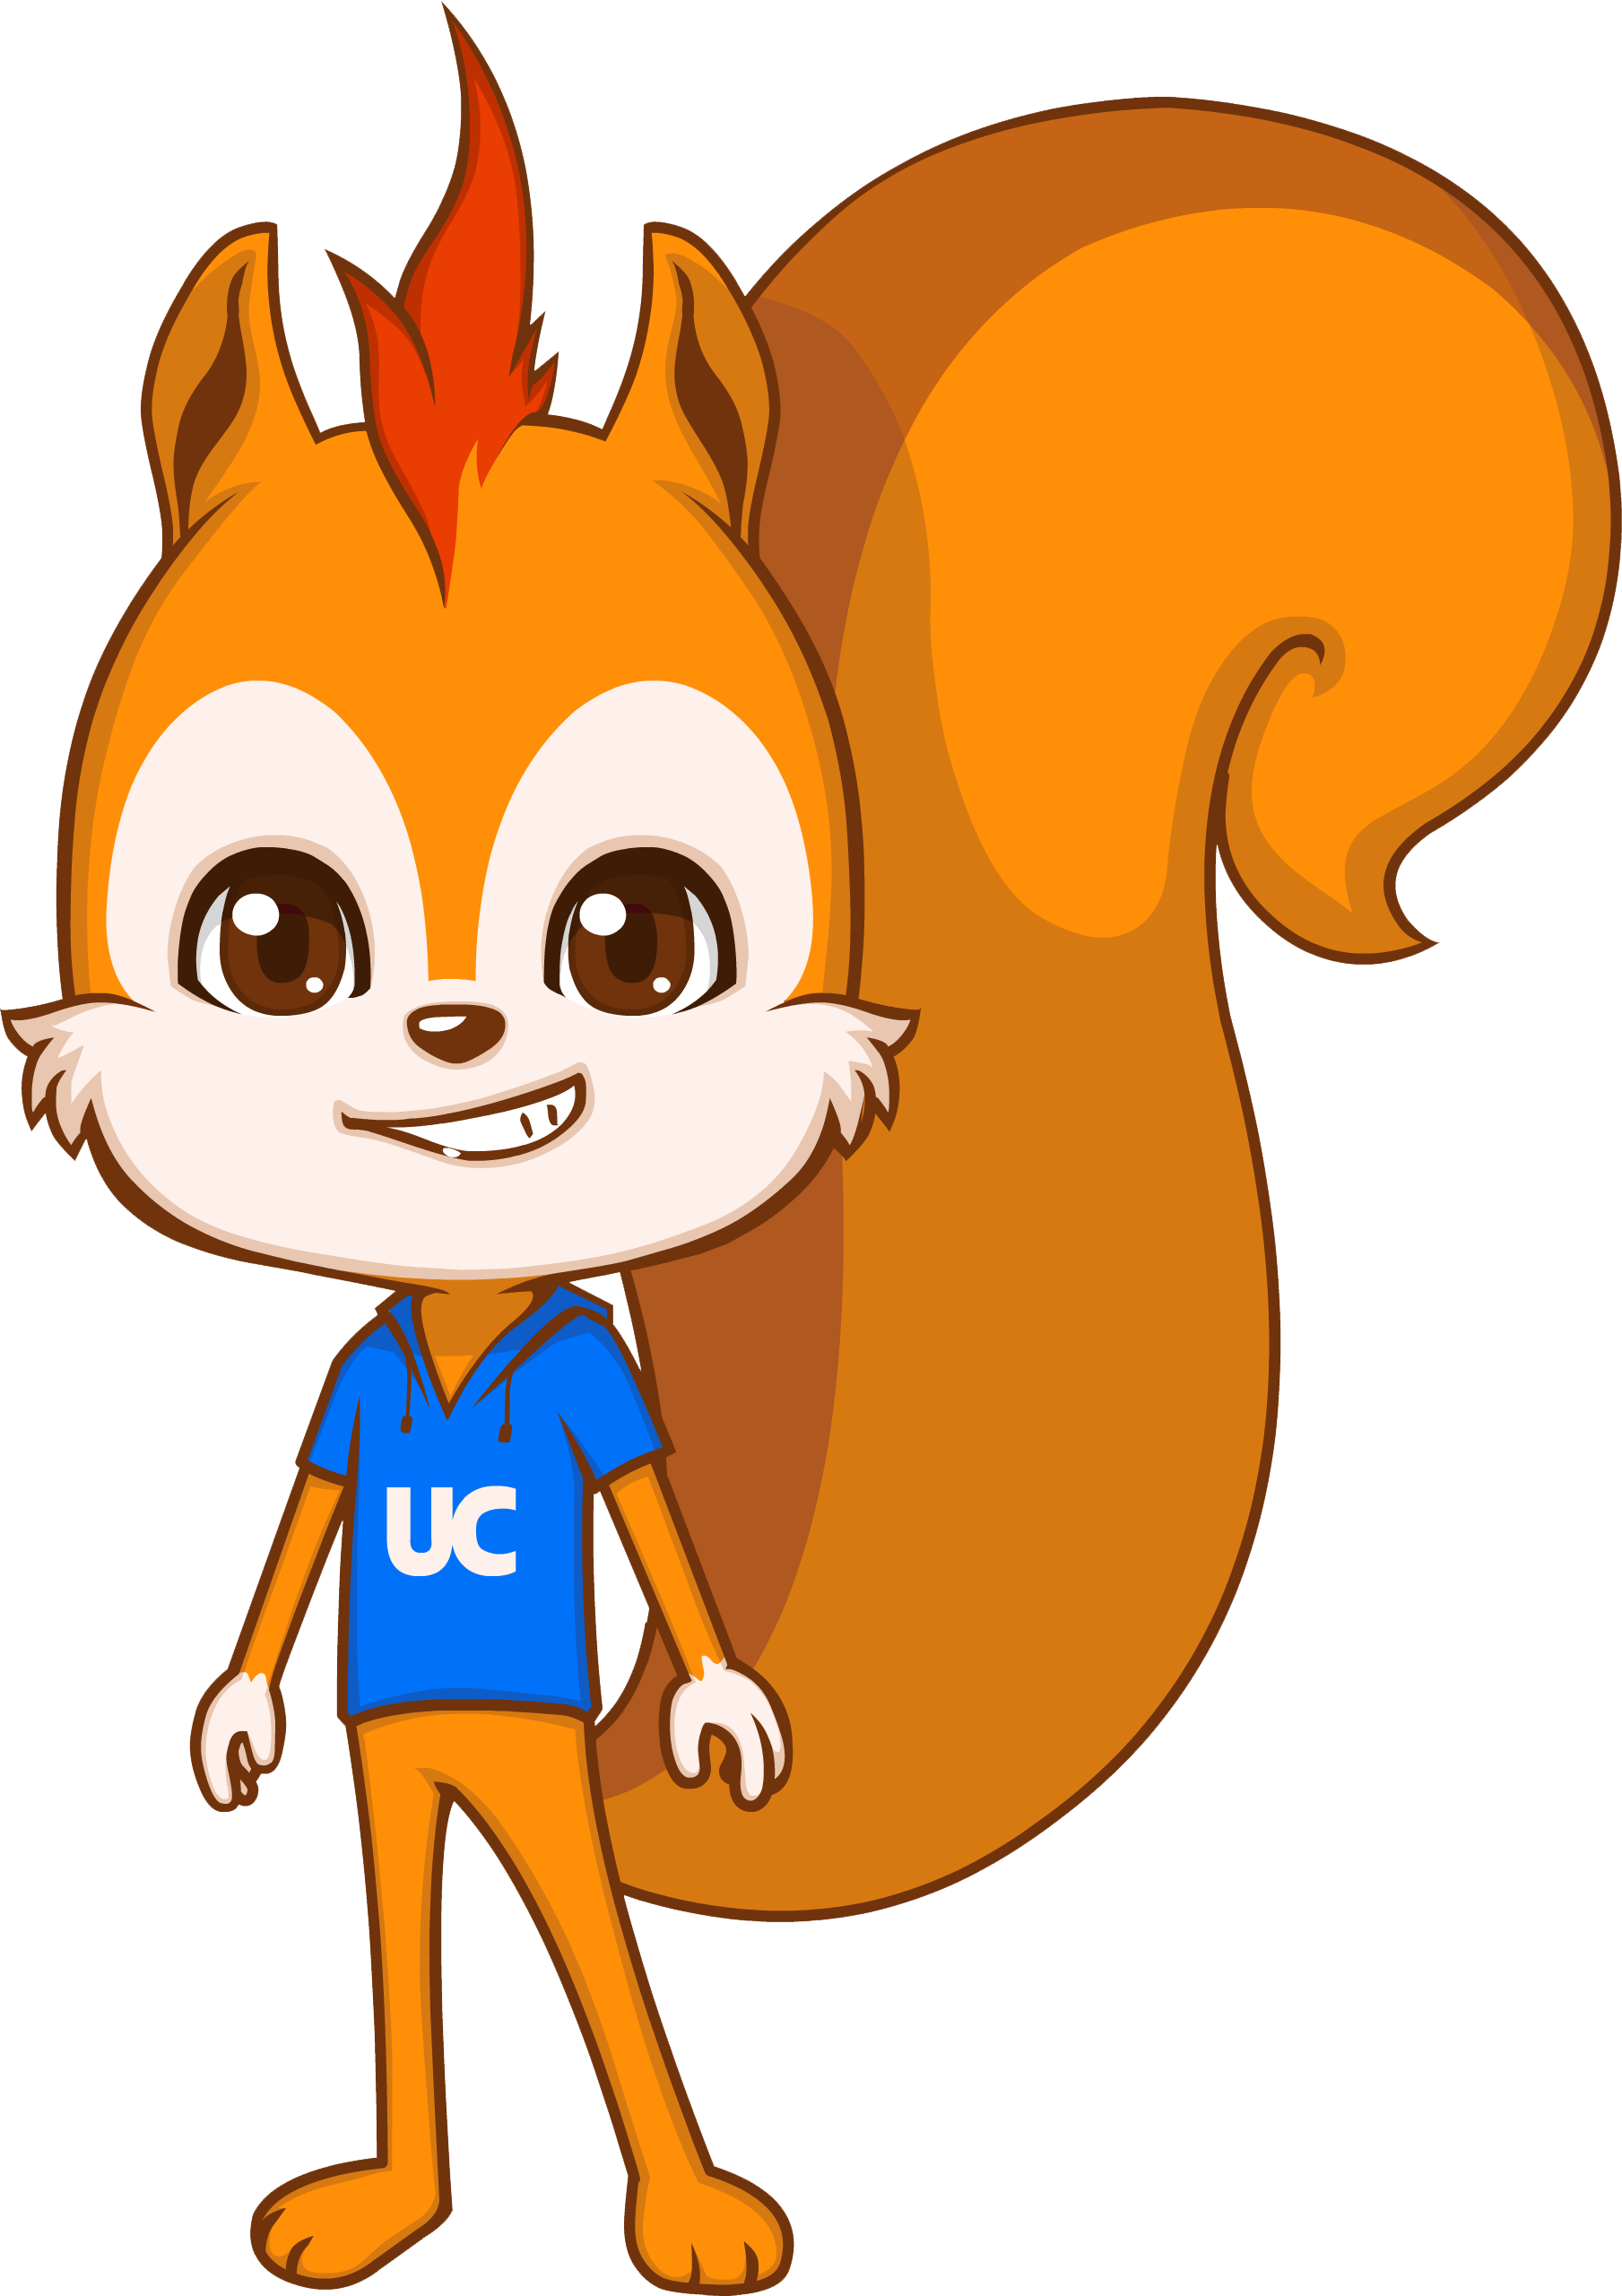 Uc Browser 64 Download / Its windows version is based on chromium and retains its signature ...